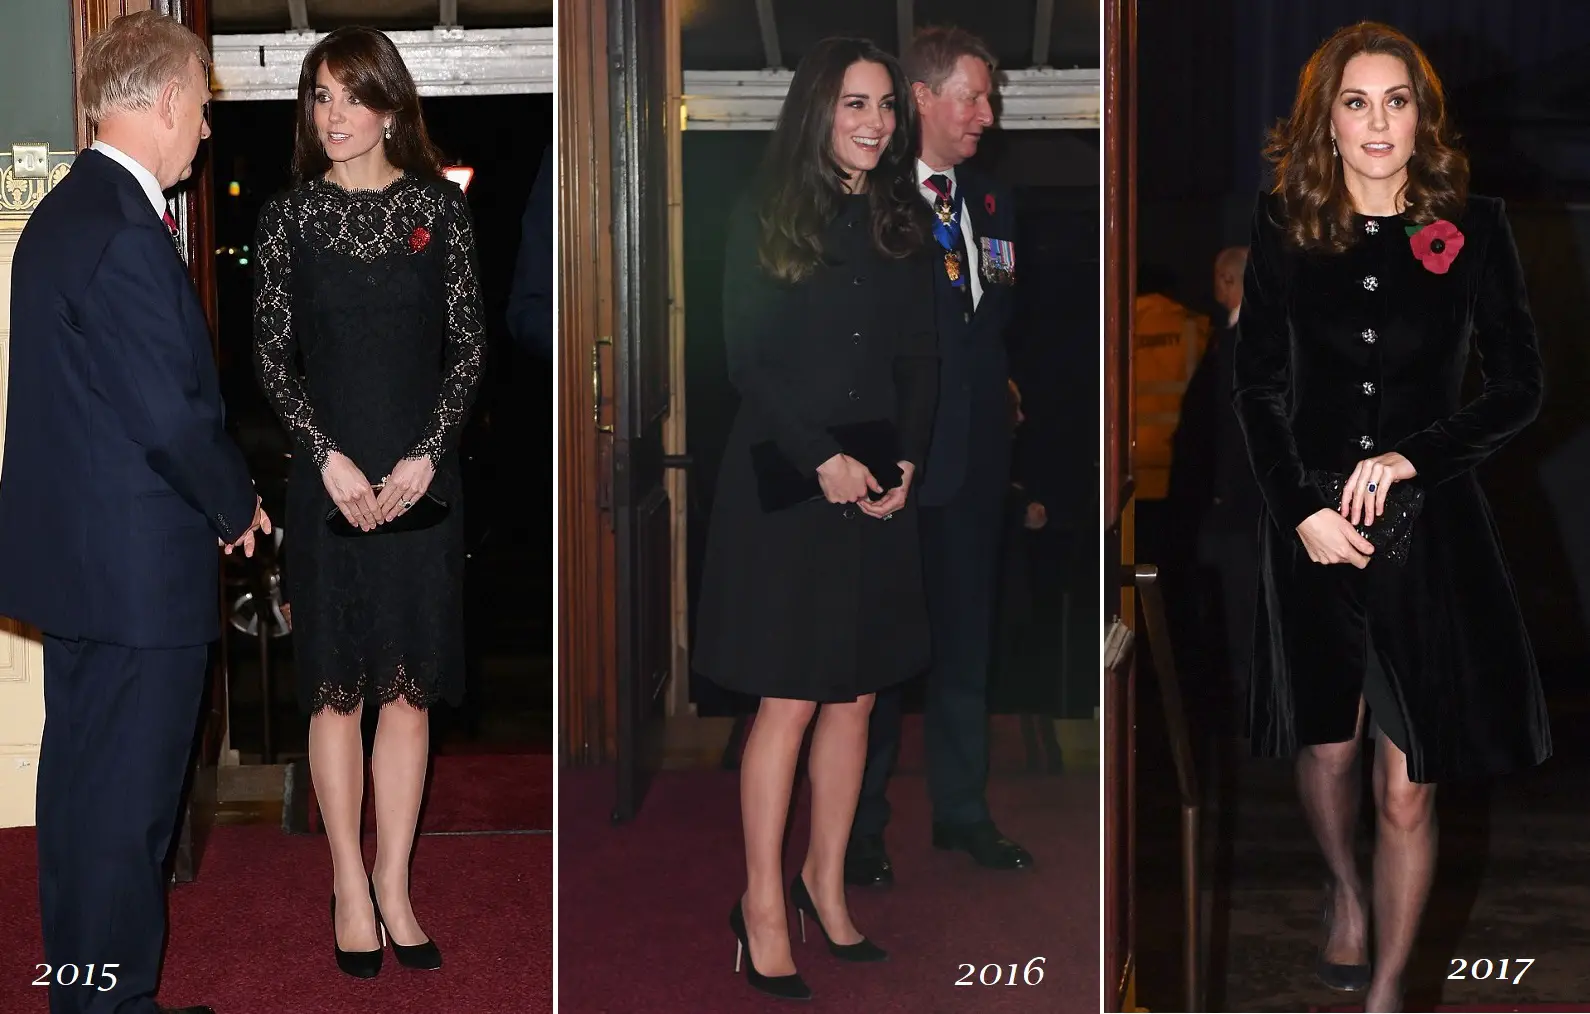 The Duchess of Cambridge at the Annual Festival of Remembrance